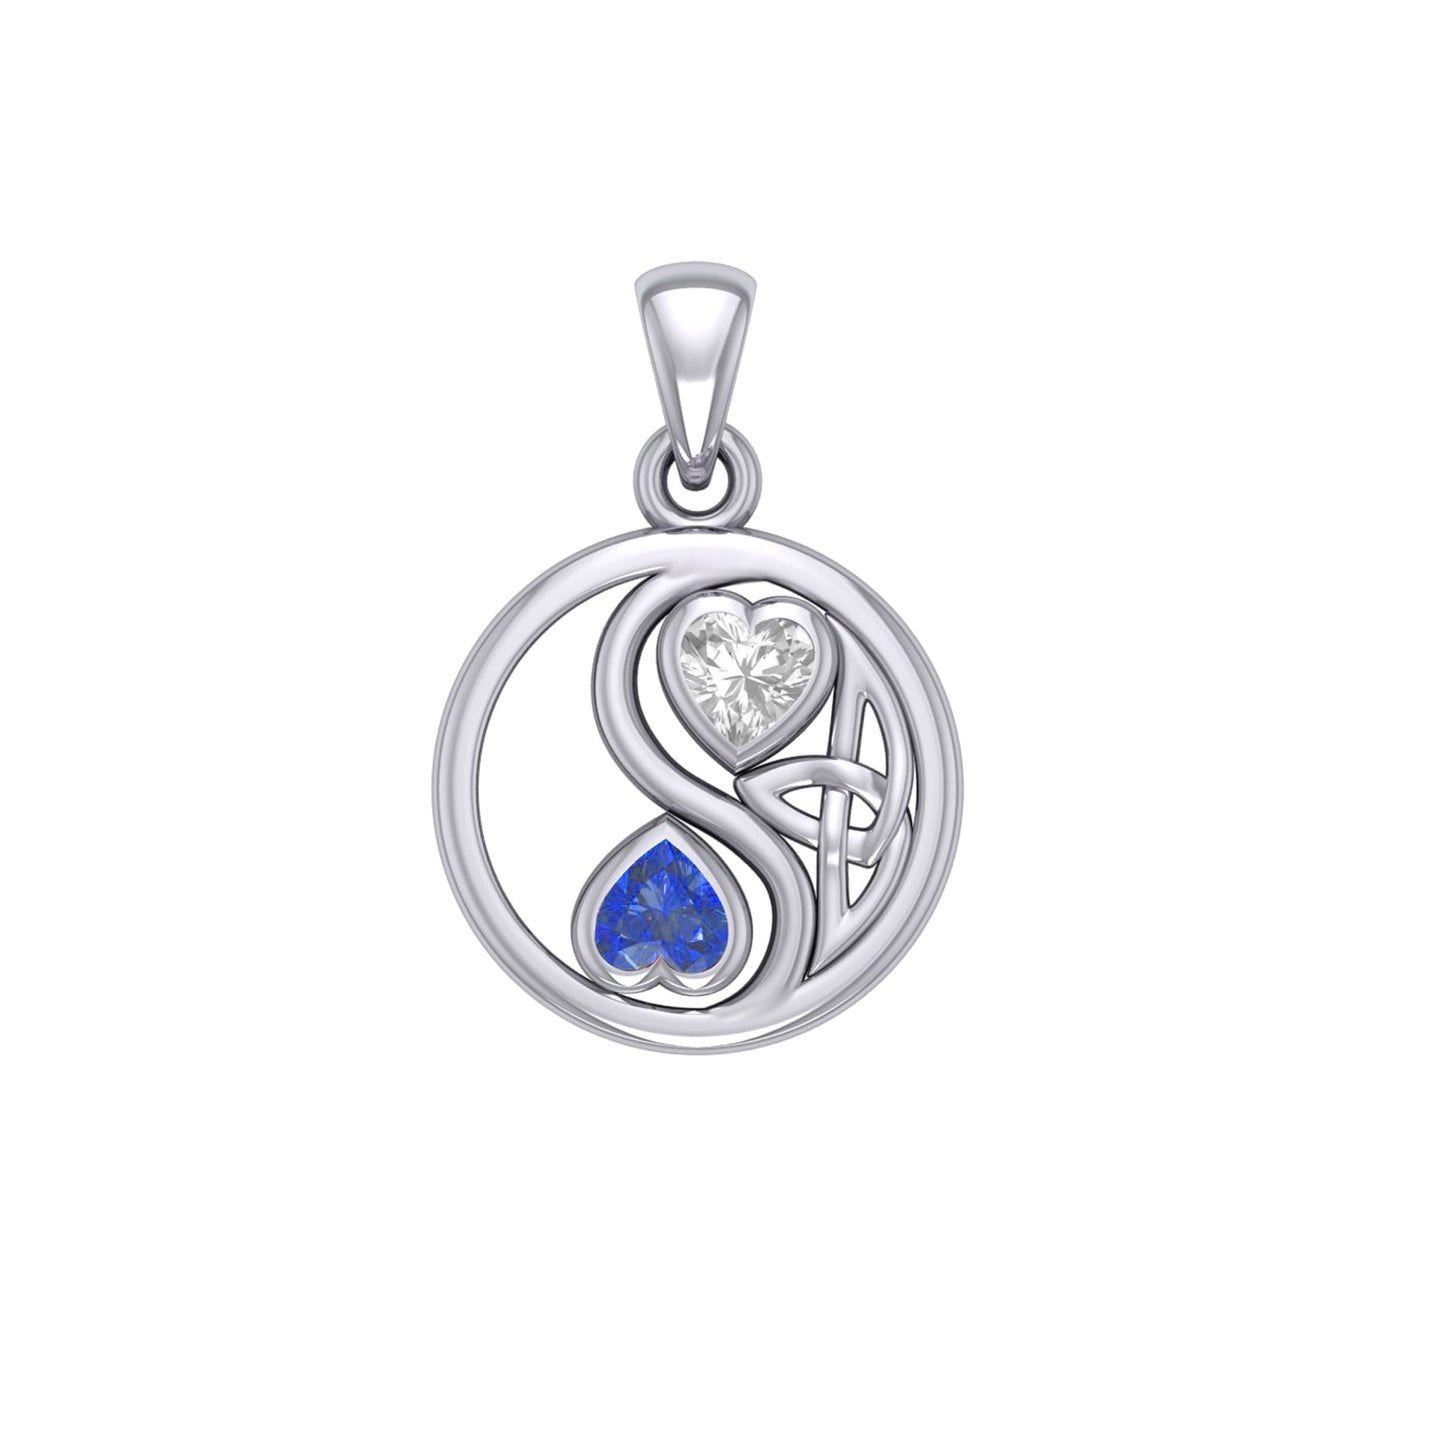 Celtic Yin Yang Love Silver Pendant with Gemstone TPD6019